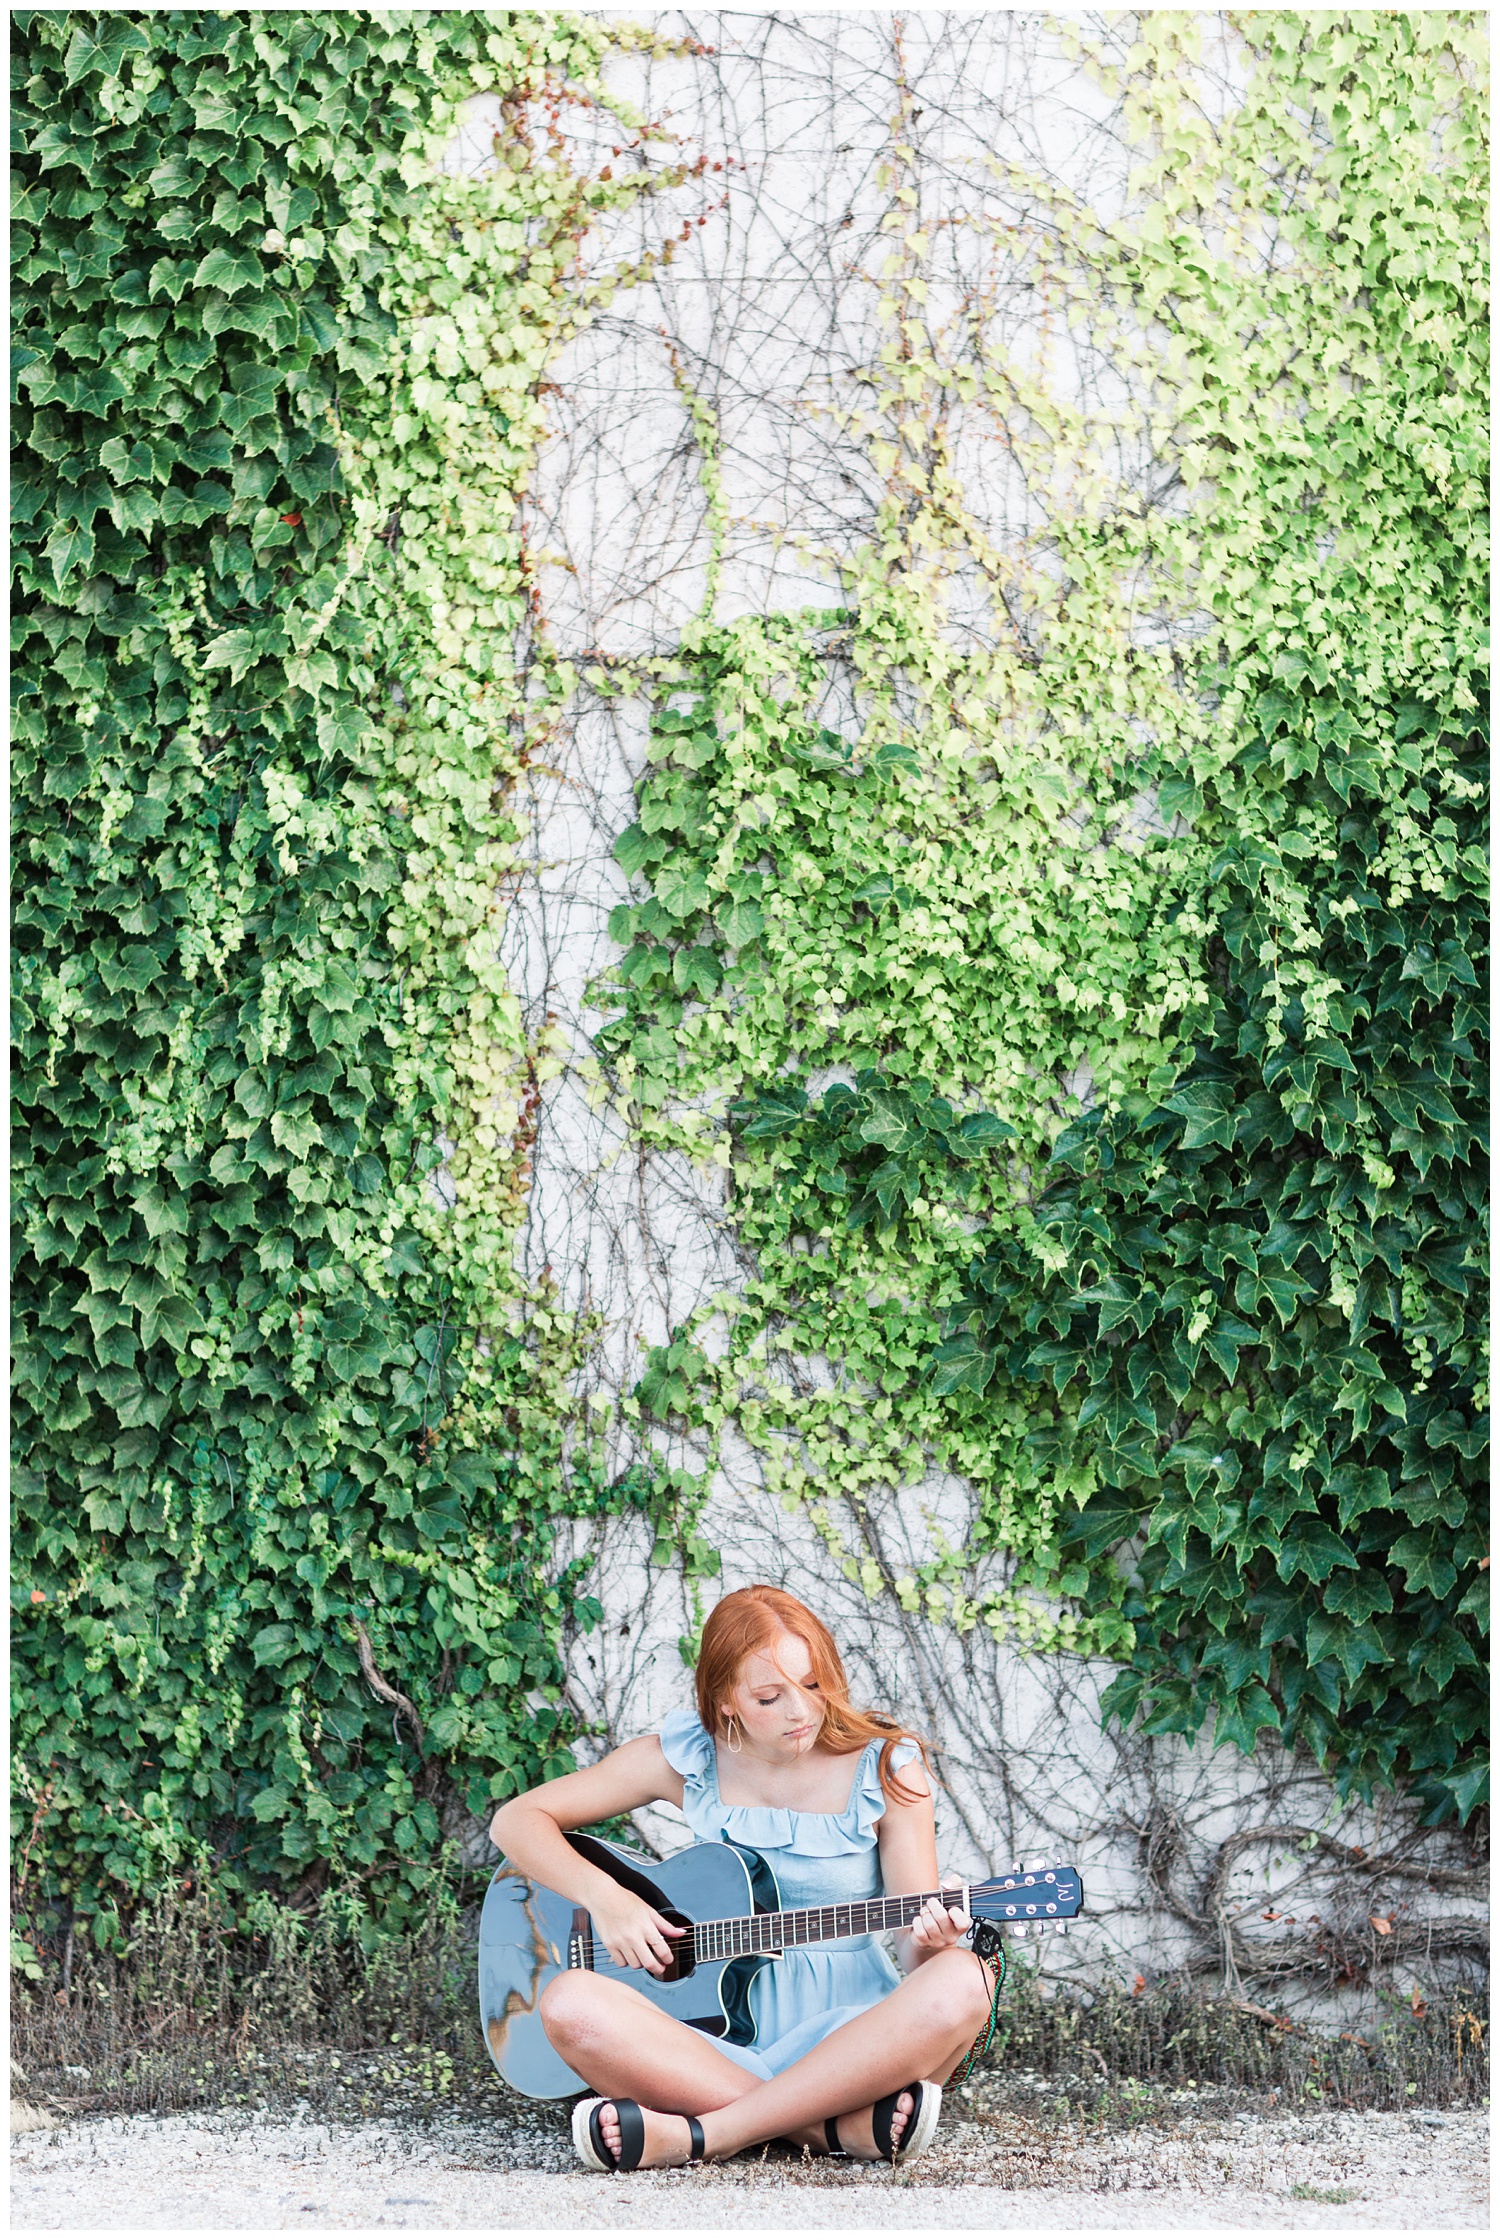 Senior girl sitting next to a green vine wall playing guitar in West Bend, Iowa | CB Studio 